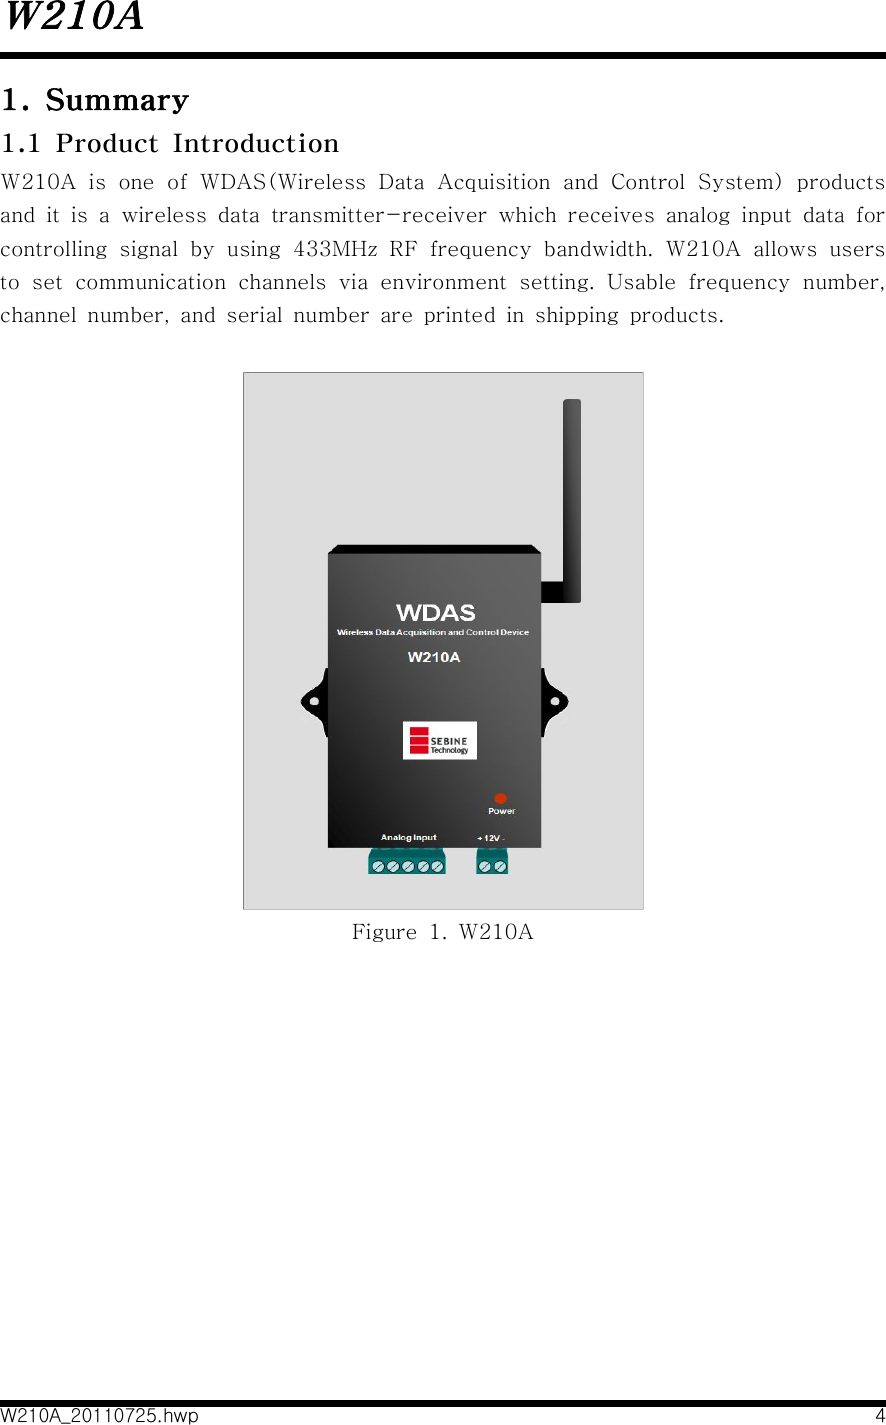 W210AW210A_20110725.hwp 41.  Summary1.1  Product  IntroductionW210A  is  one  of  WDAS(Wireless  Data  Acquisition  and  Control  System)  products and  it  is  a  wireless  data  transmitter-receiver  which  receives  analog  input  data  for controlling  signal  by  using  433MHz  RF  frequency  bandwidth.  W210A  allows  users to  set  communication  channels  via  environment  setting.  Usable  frequency  number, channel  number,  and  serial  number  are  printed  in  shipping  products.   Figure  1.  W210A